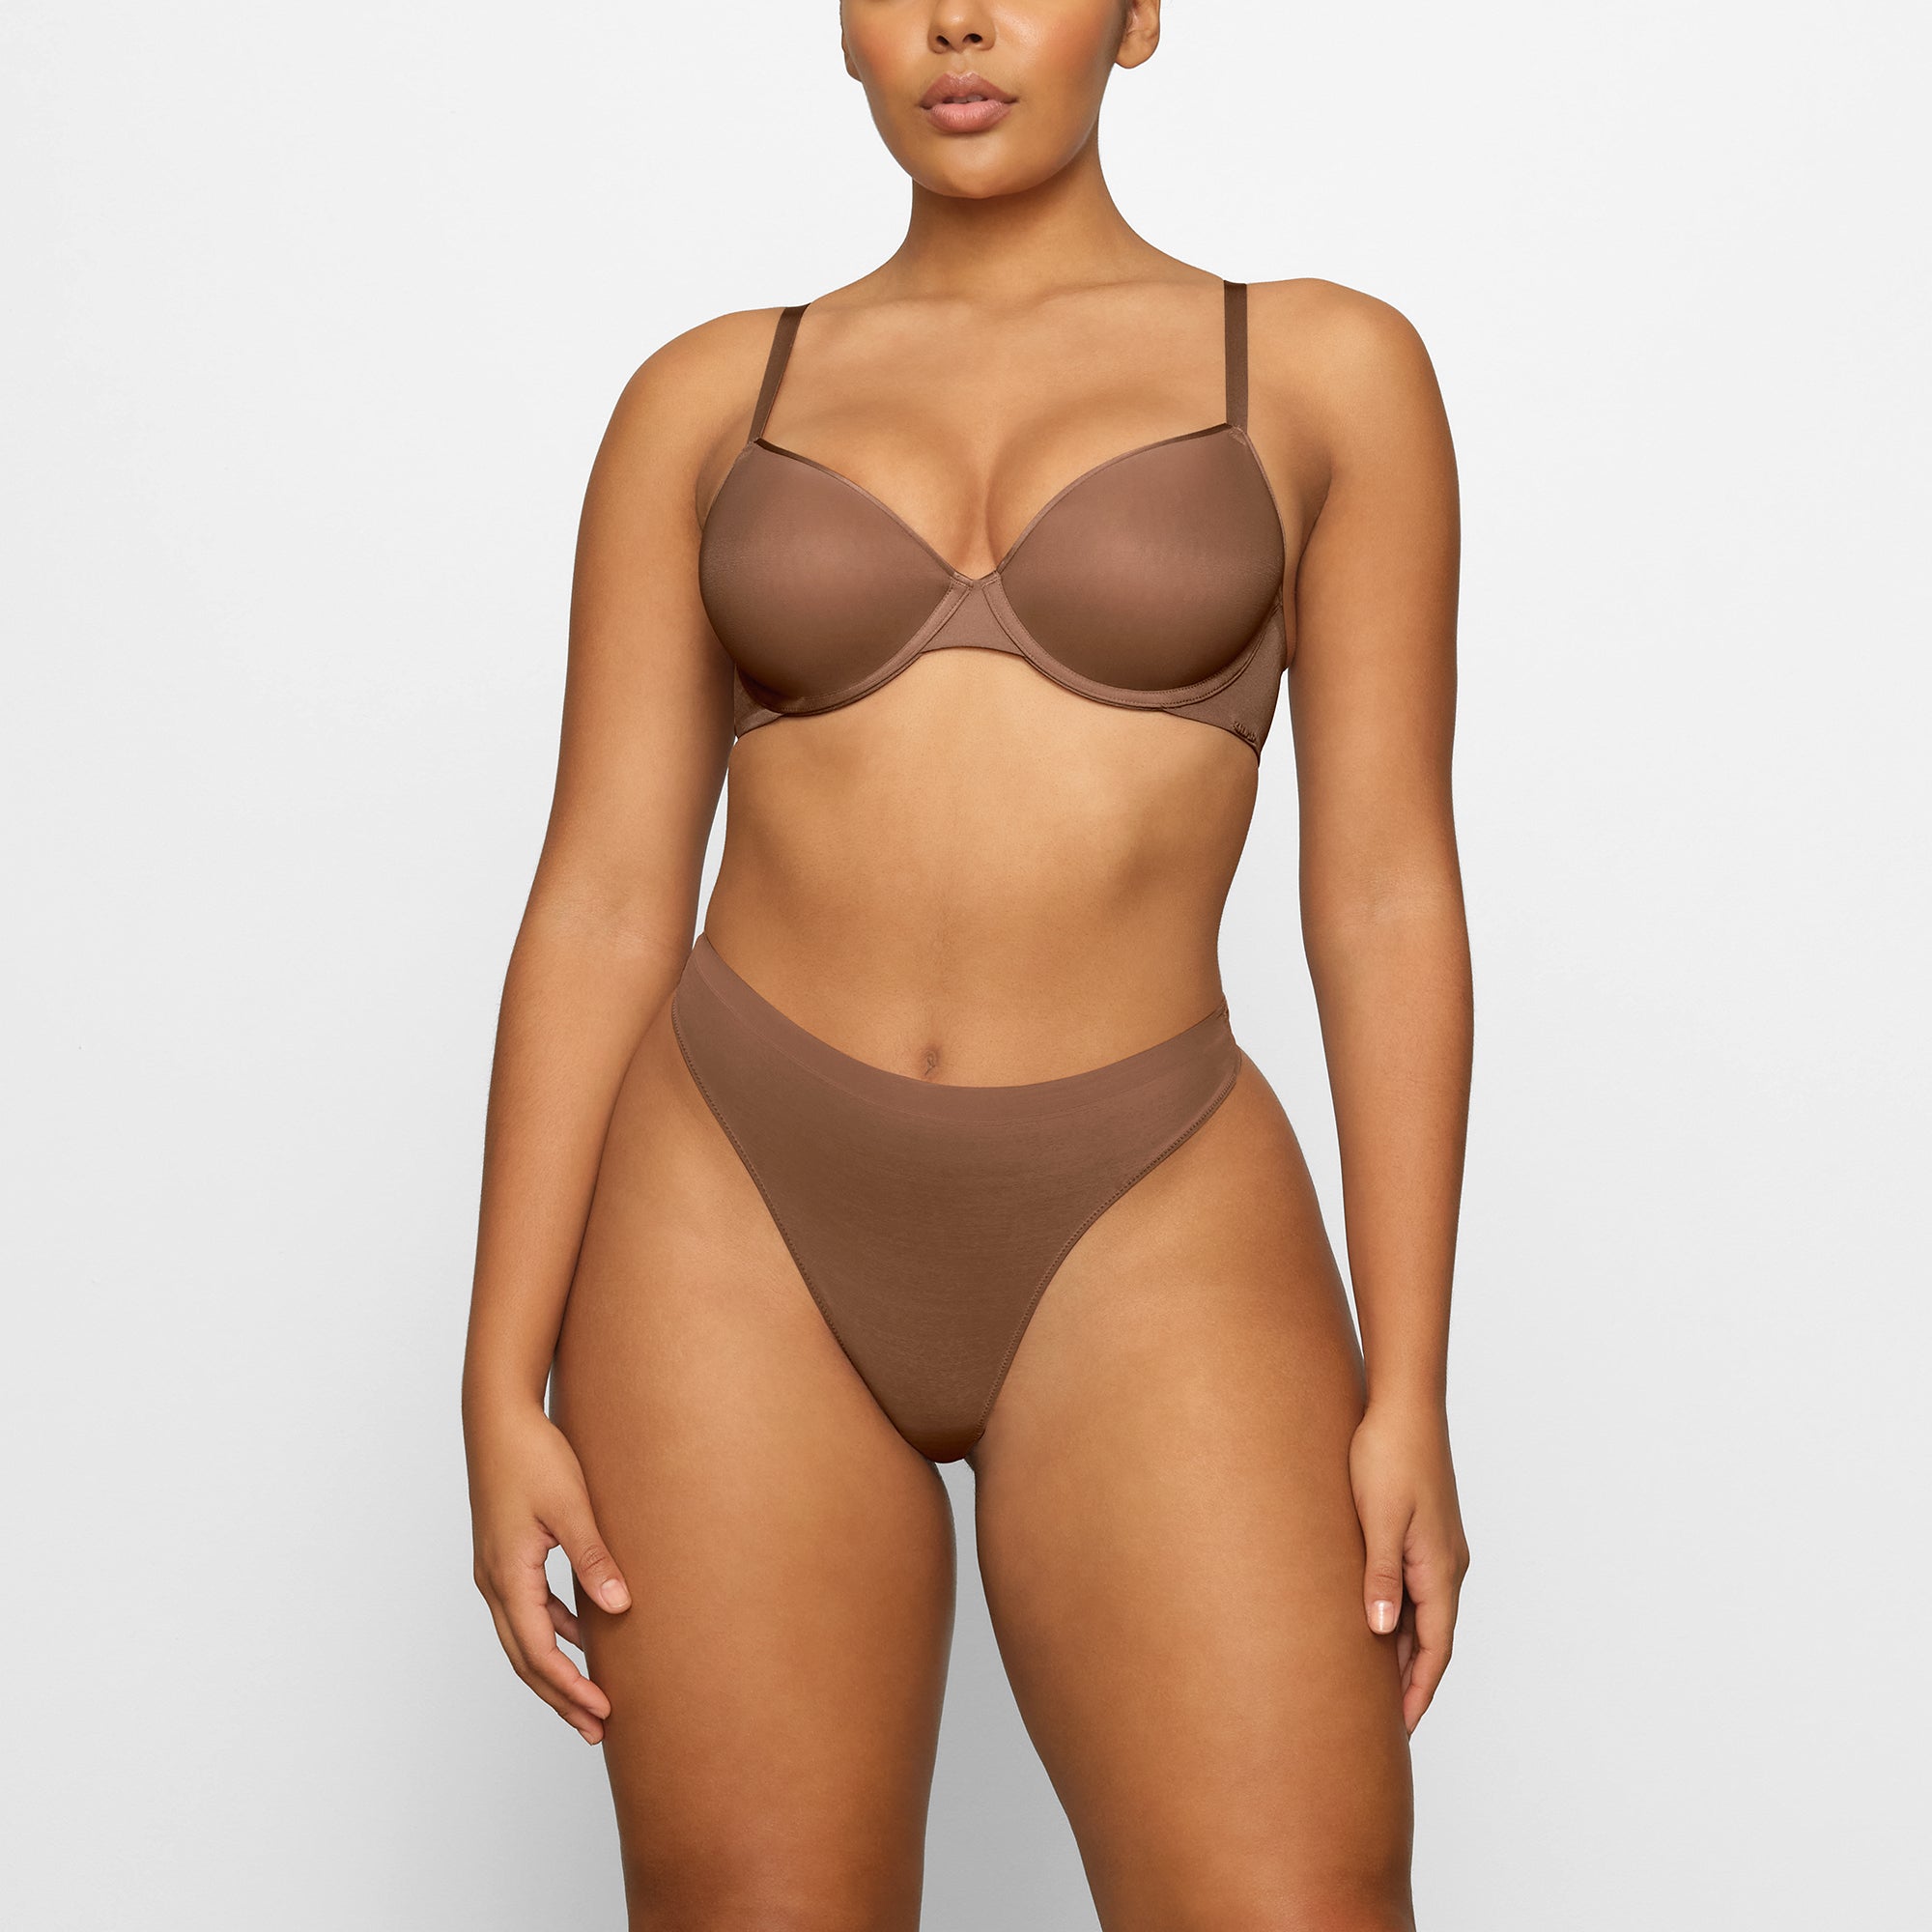 SKIMS Weightless Demi Bra 34D NWT Tan Size 34 D - $29 (50% Off Retail) New  With Tags - From Ali